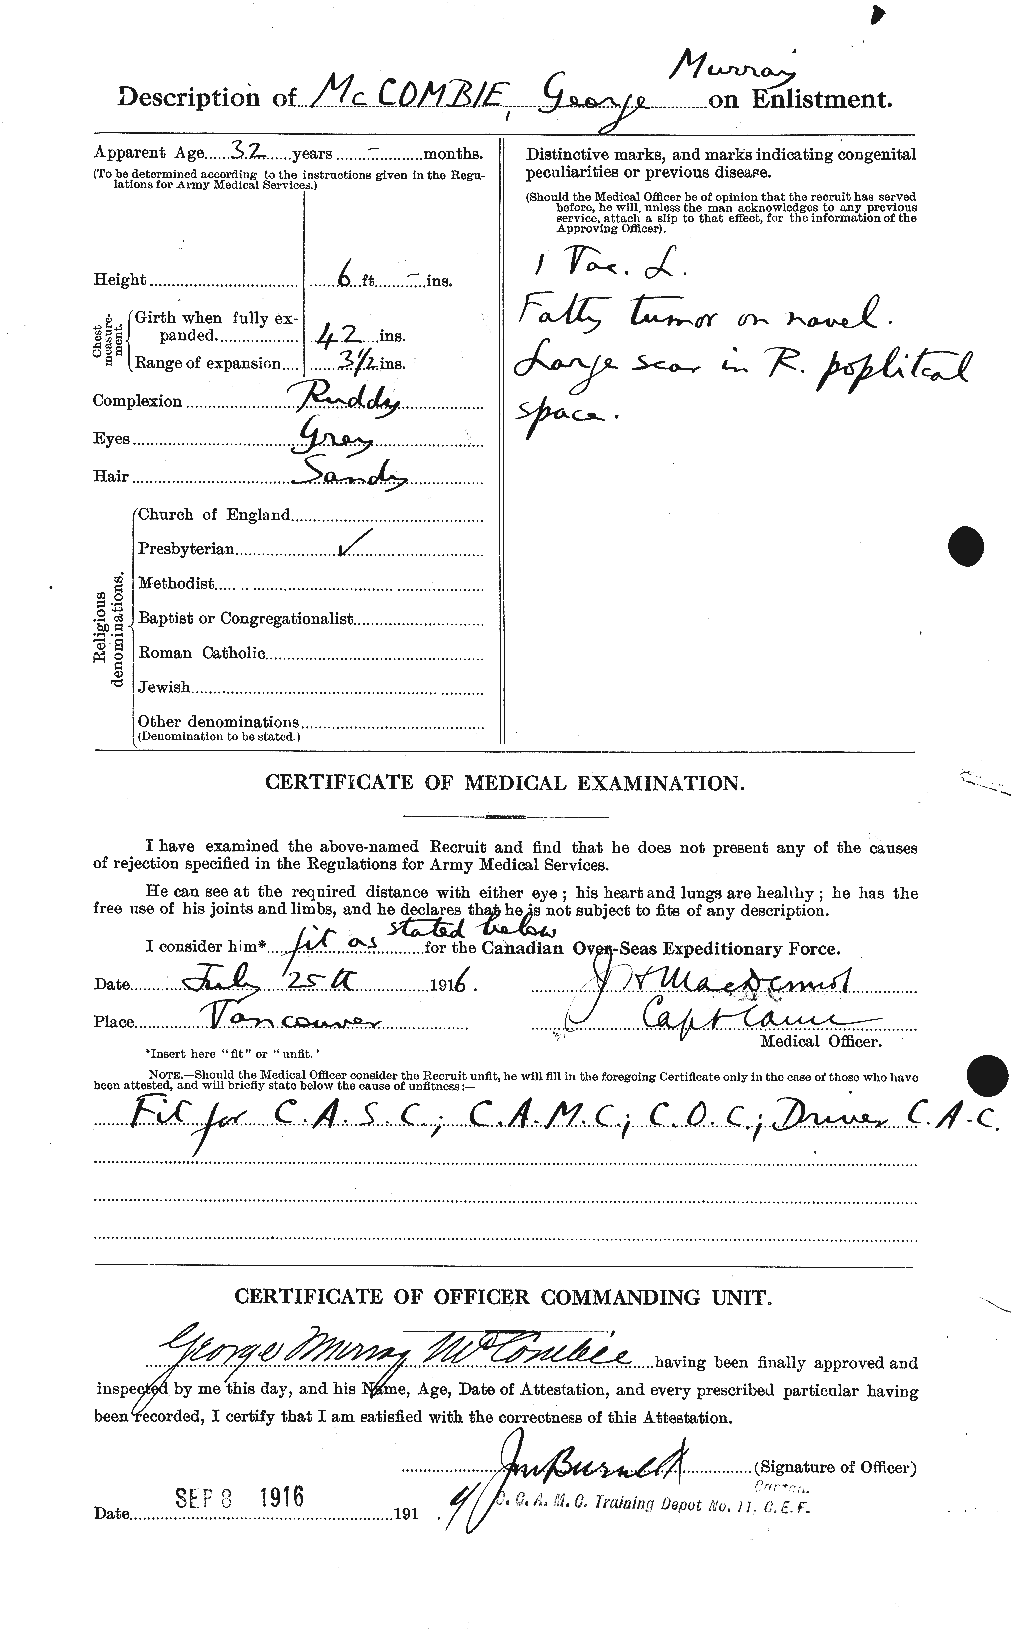 Personnel Records of the First World War - CEF 133089b